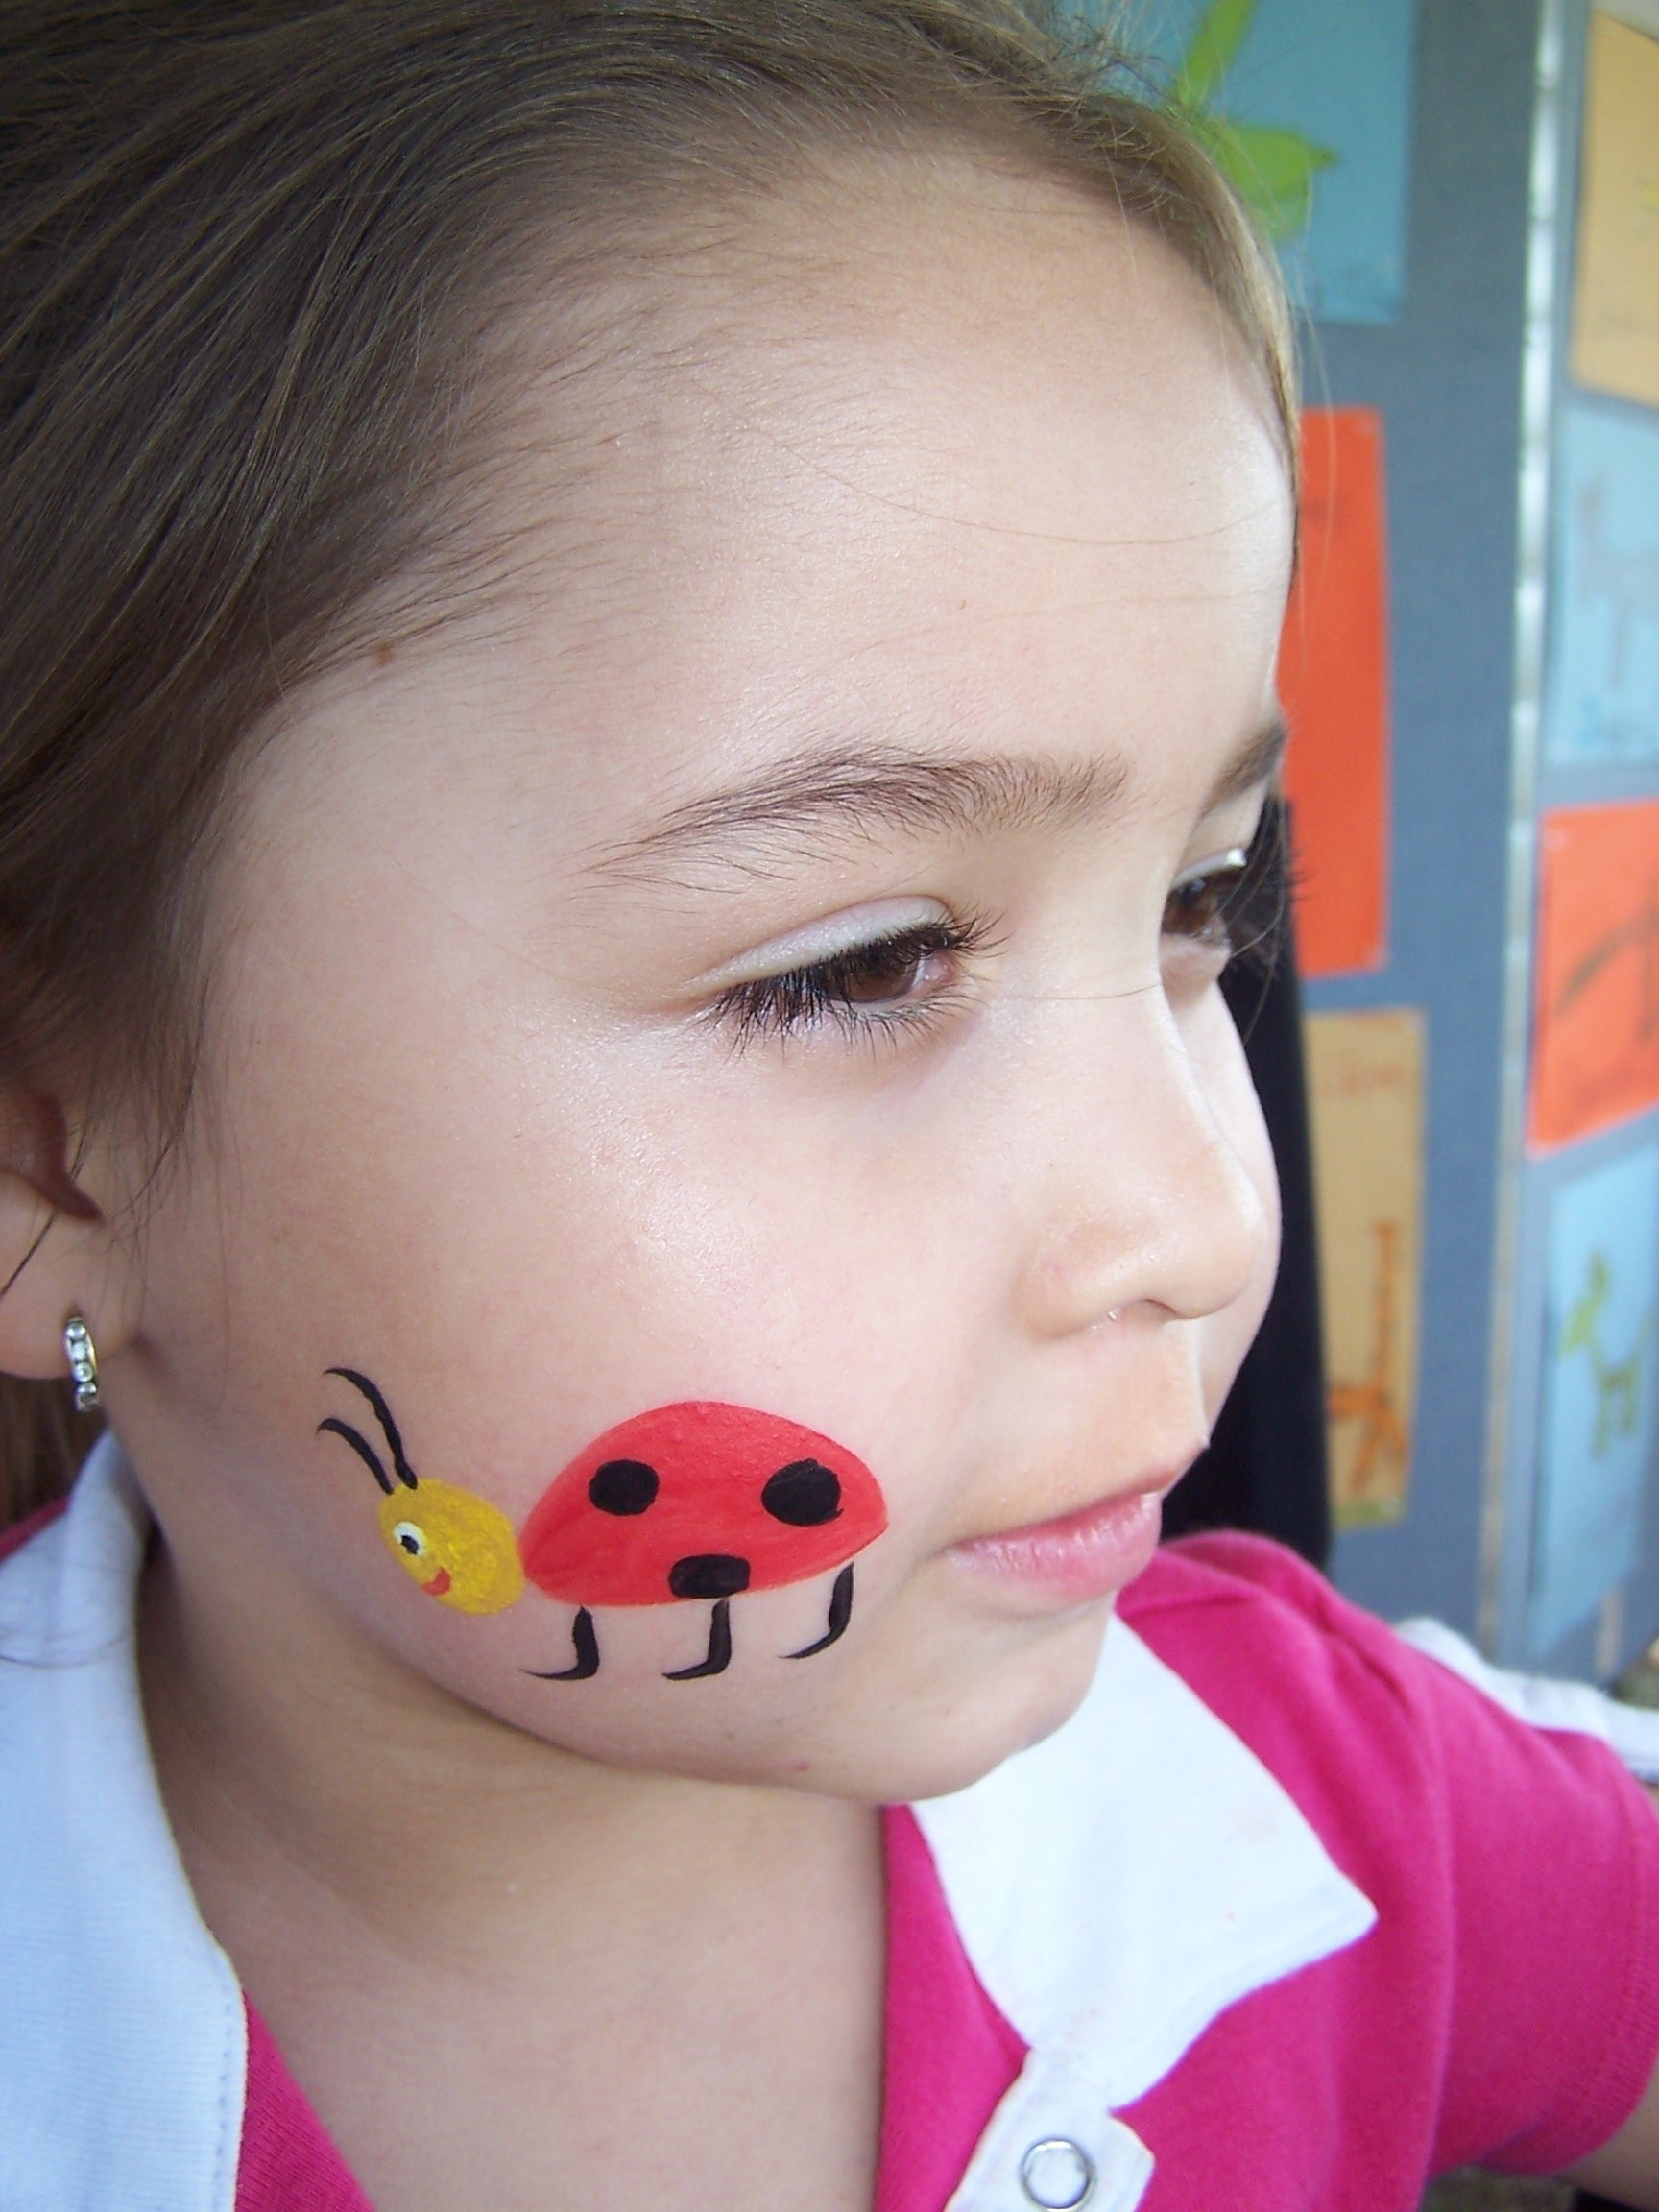 10 Amazing Simple Face Painting Ideas For Kids pin lady bug picture to pinterest description from tattoopins 2 2022